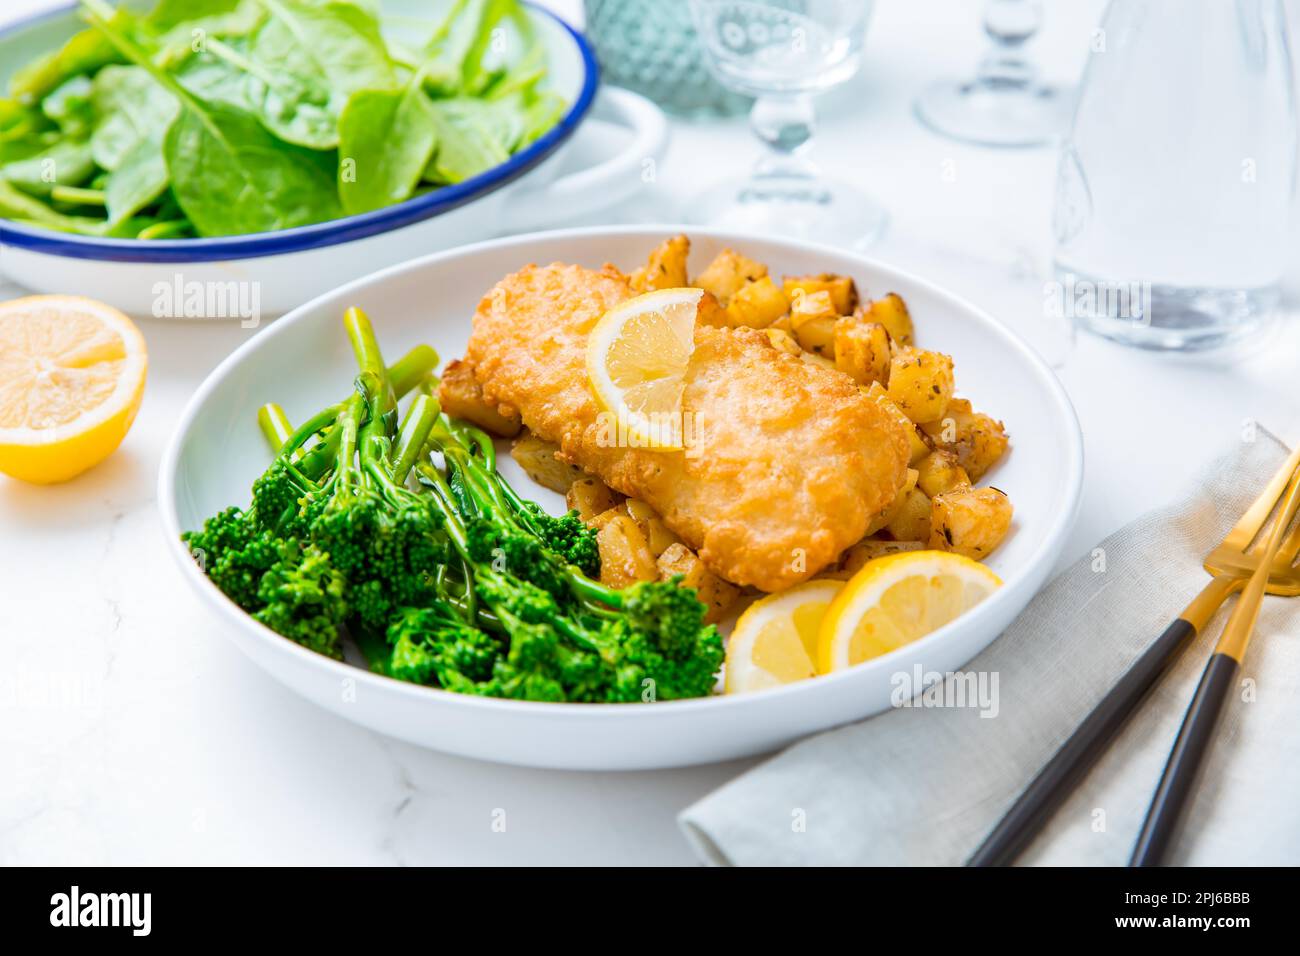 Breaded fisch fillet with spicy baked potatoes and broccoli (bimi) salad with lemon Stock Photo